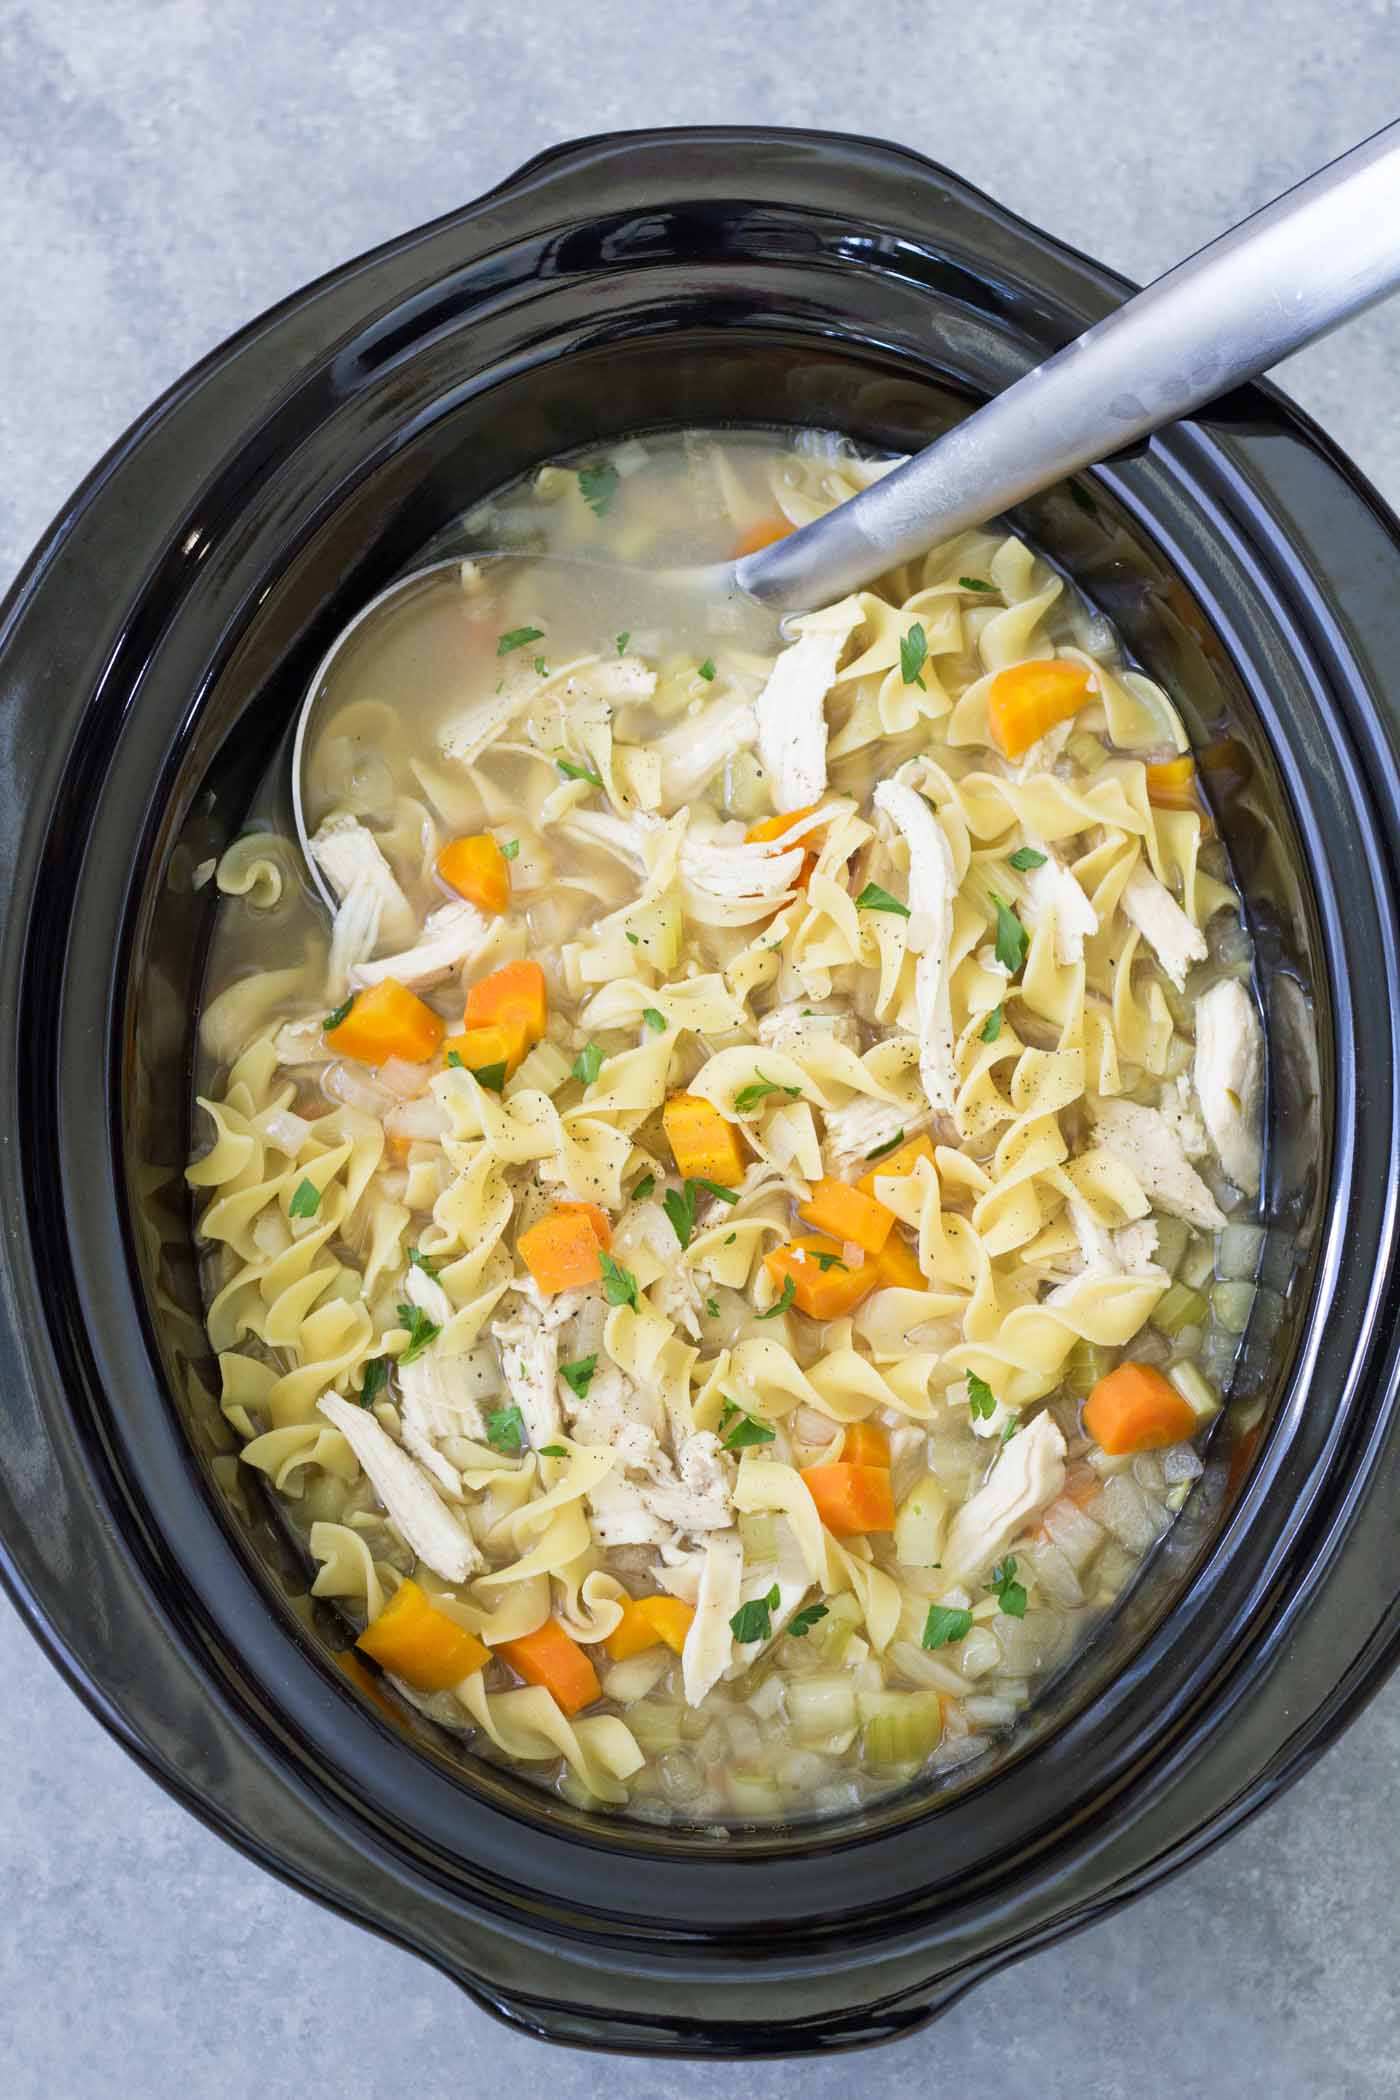 Crockpot chicken noodle soup in a slow cooker with a ladle.